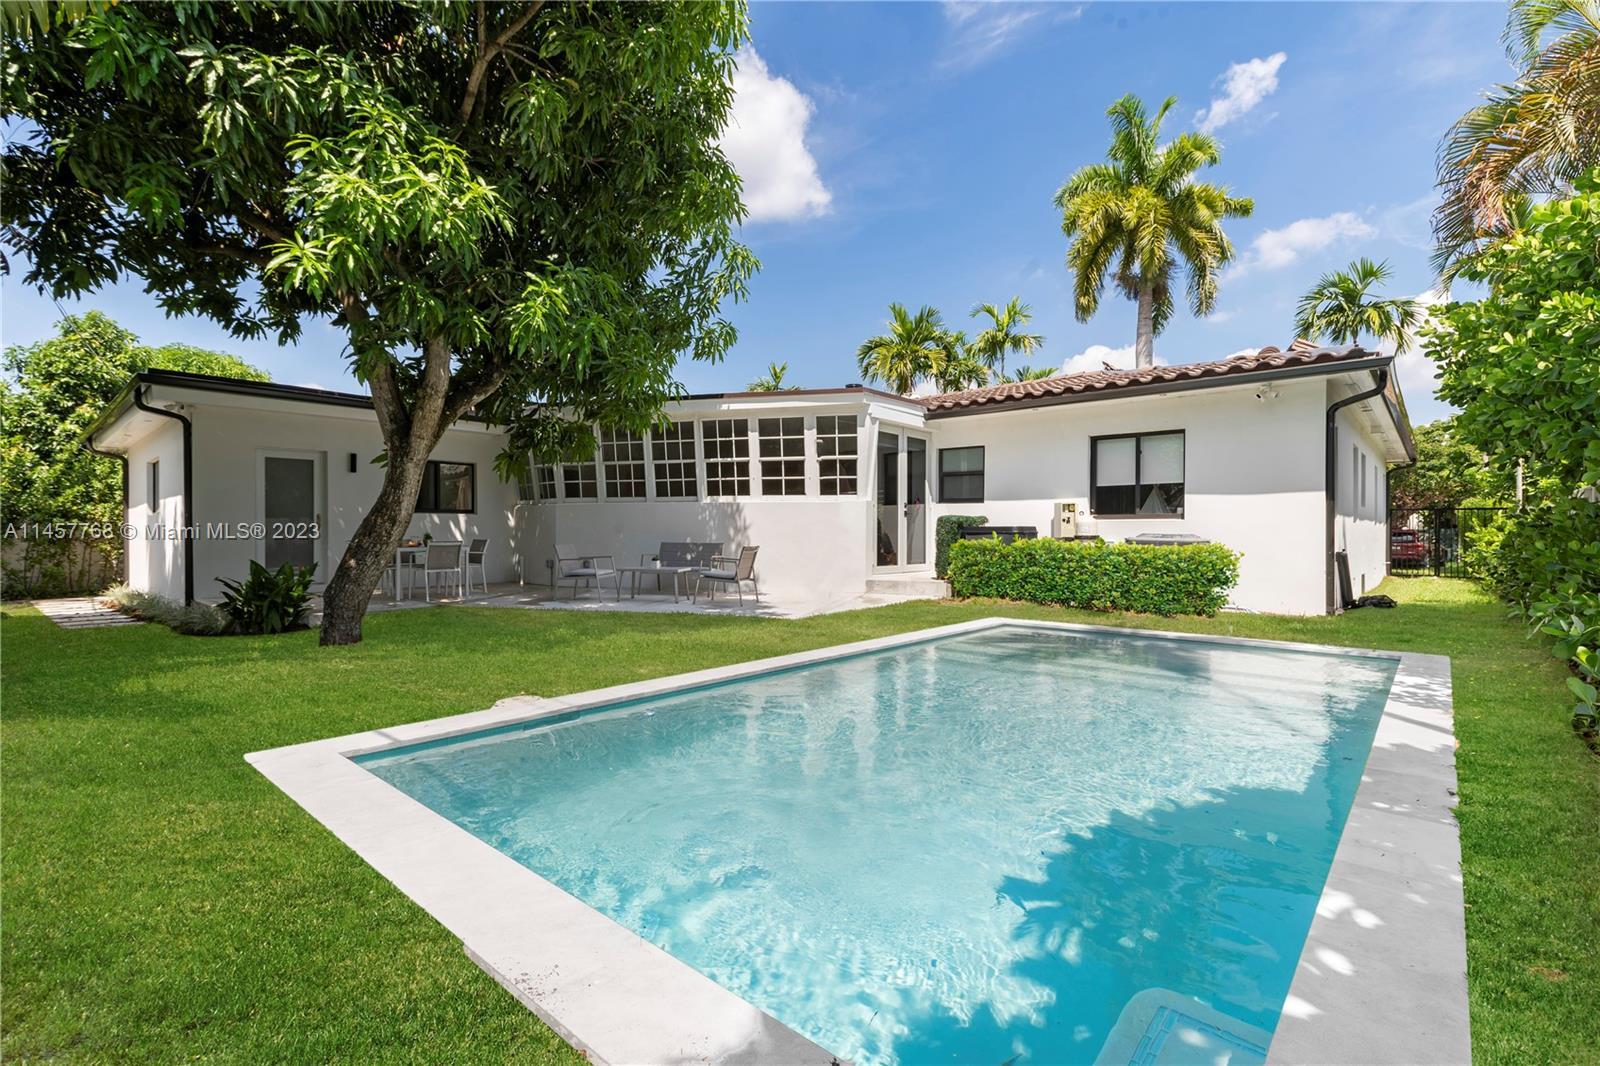 Indulge in the calming coastal ambiance of this meticulously fully renovated mid-century pool home i